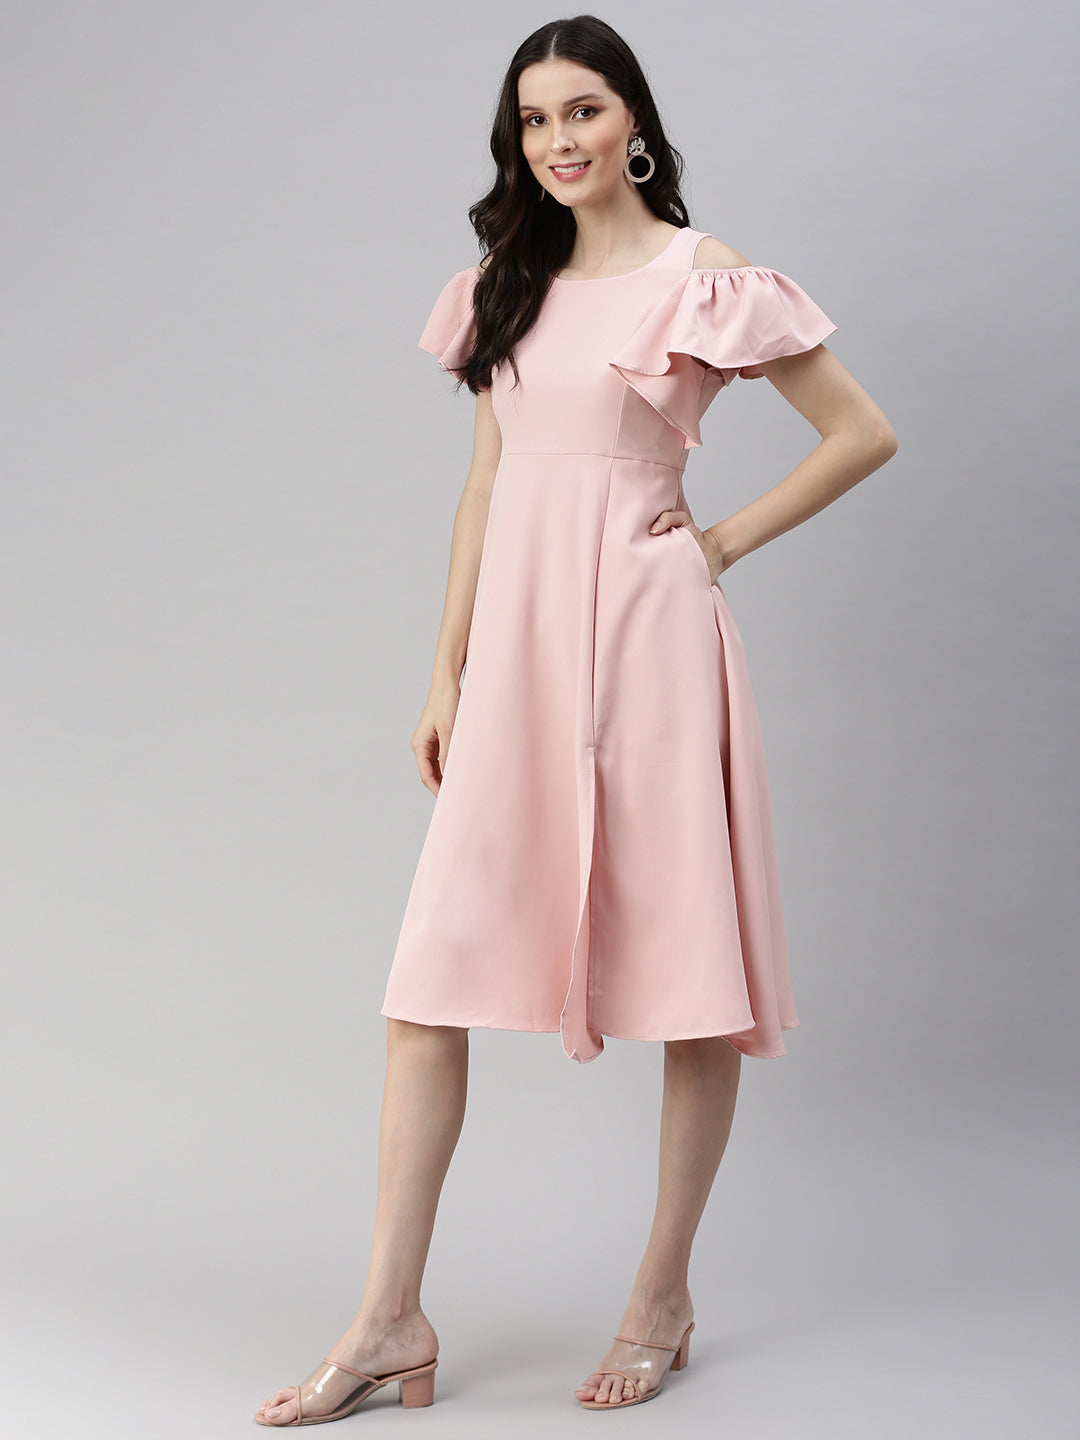 Women Solid Fit and Flare Pink Dress